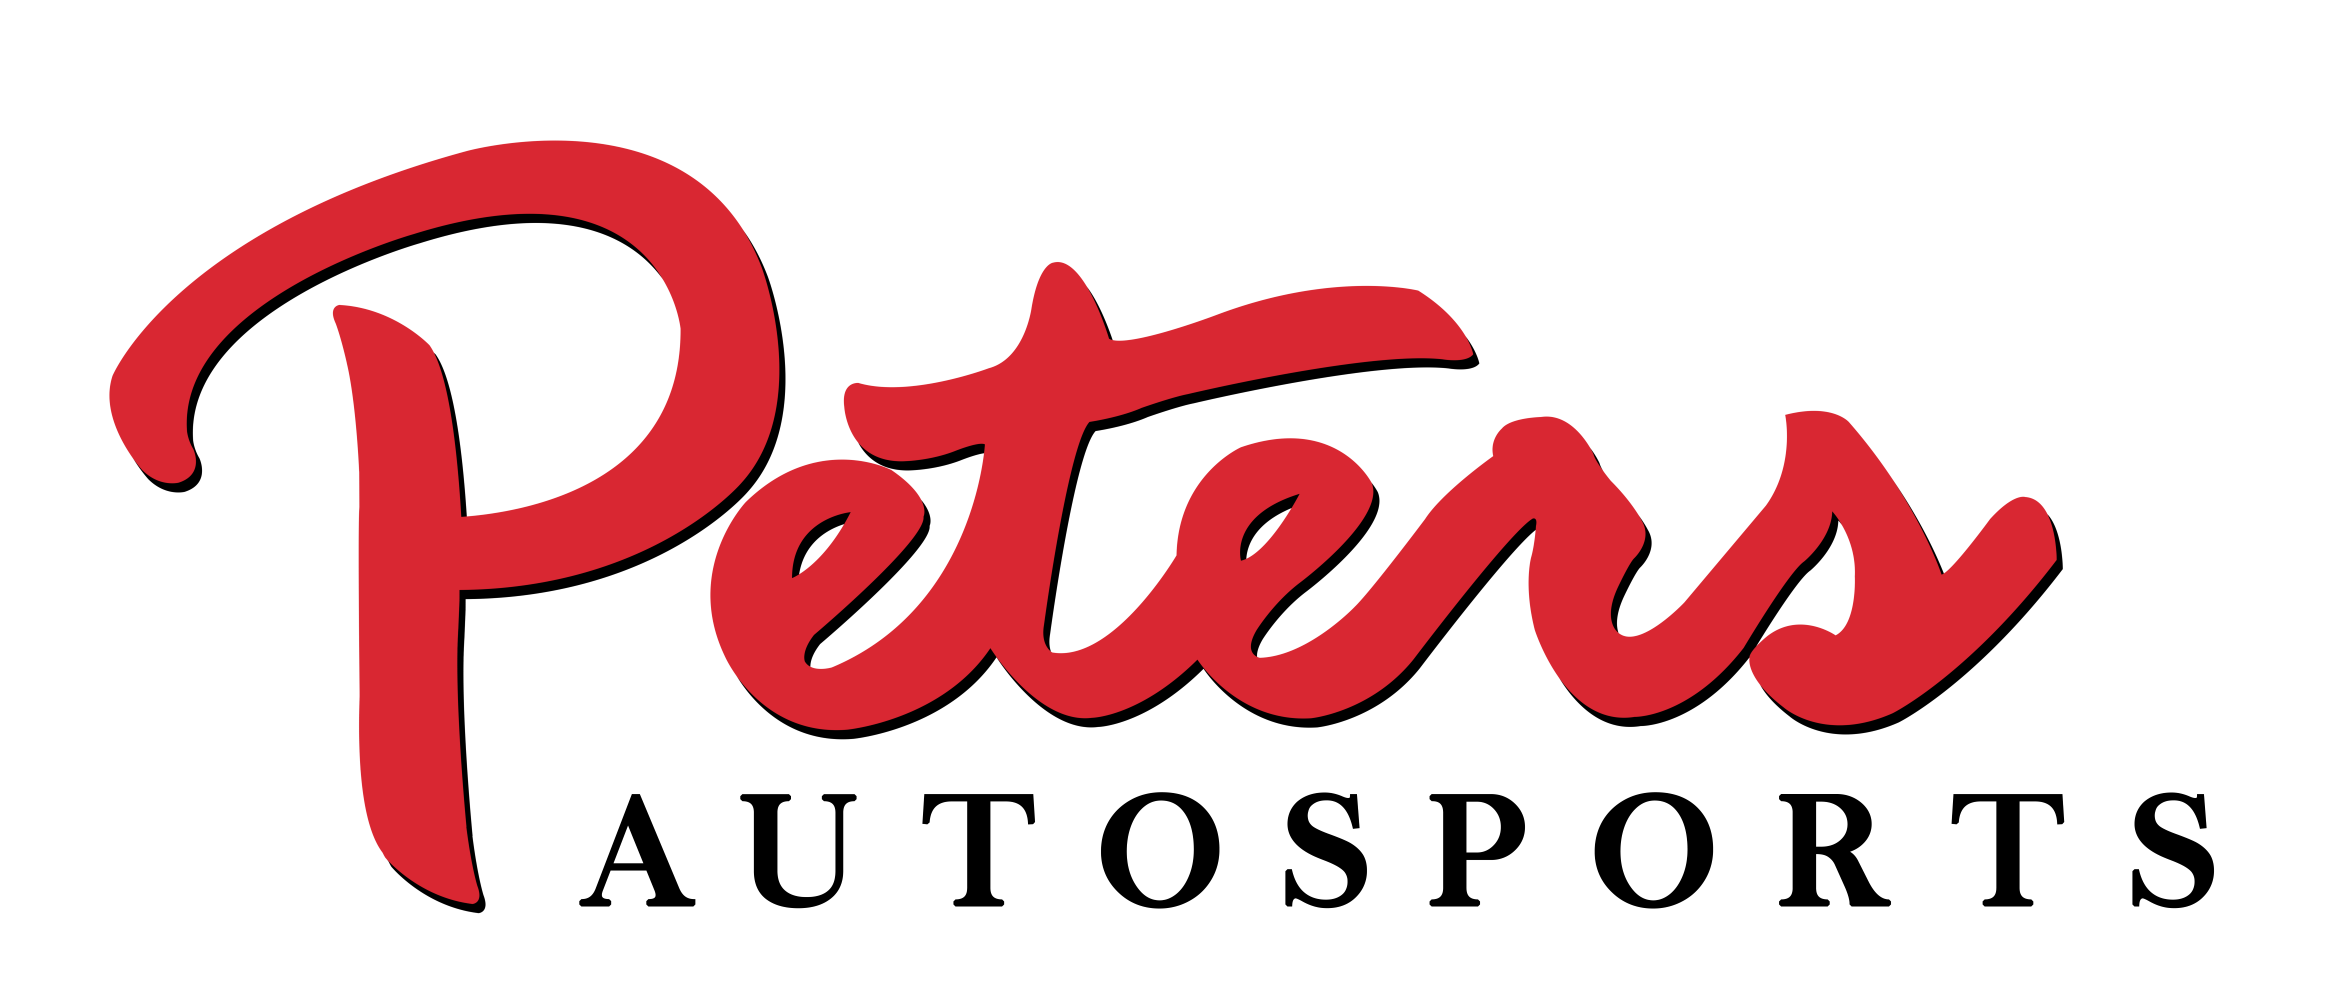 Peters Autosports-updated